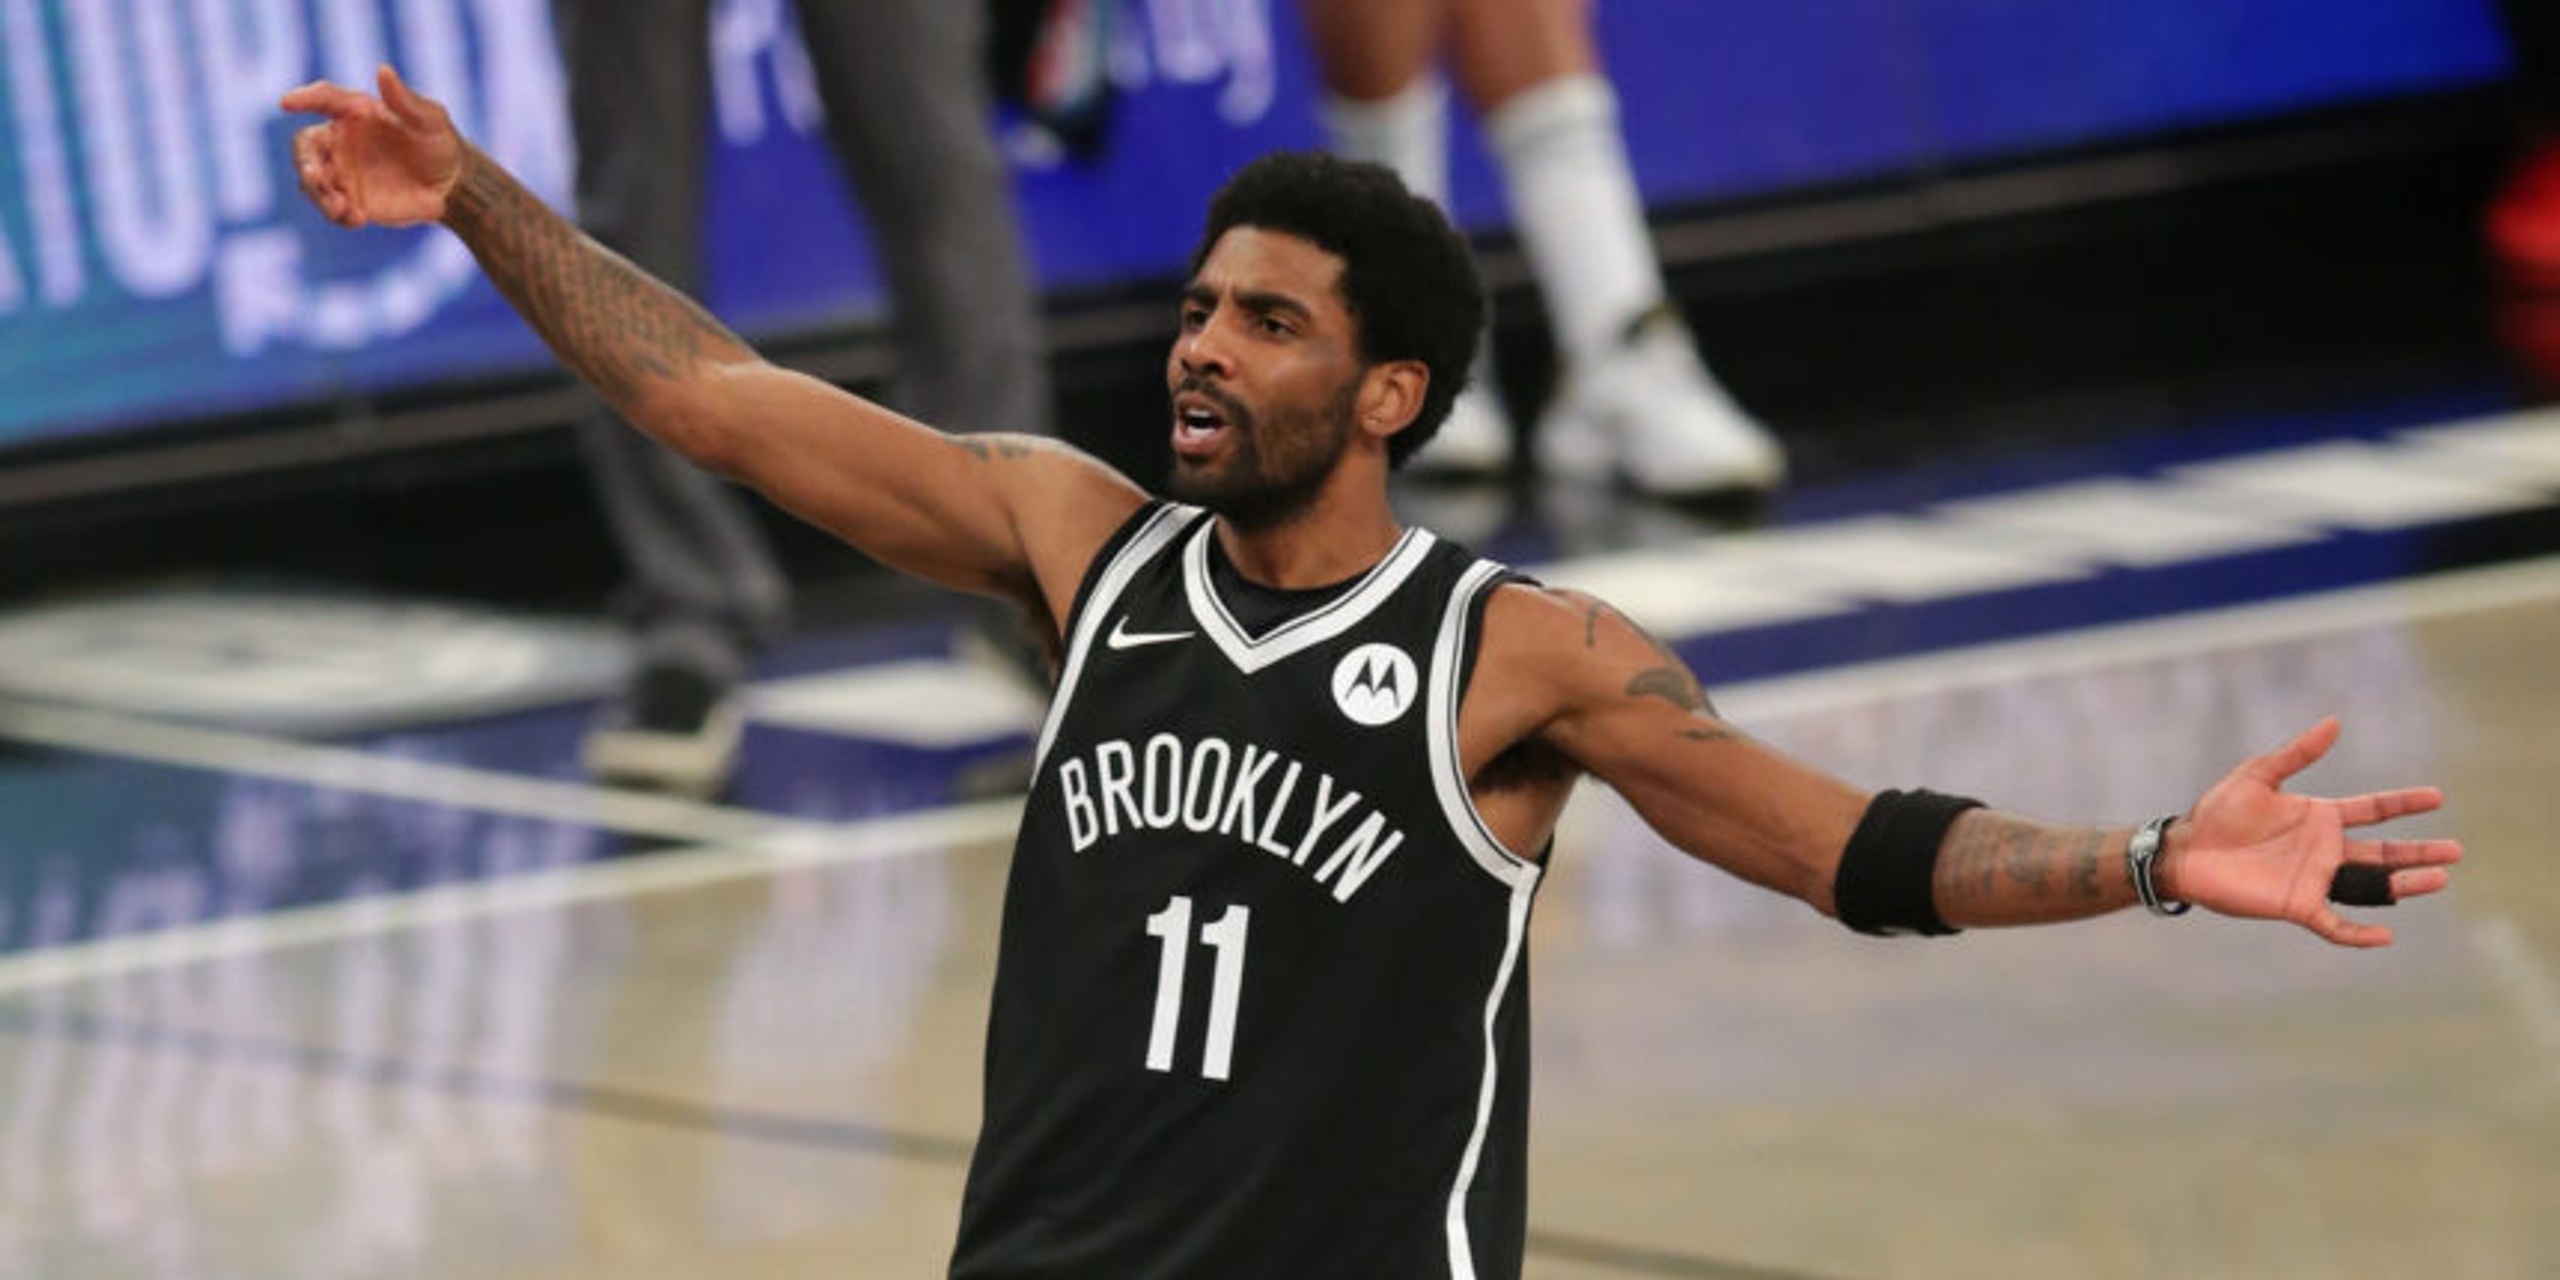 It’ll be difficult for Kyrie and the Nets to come back from this